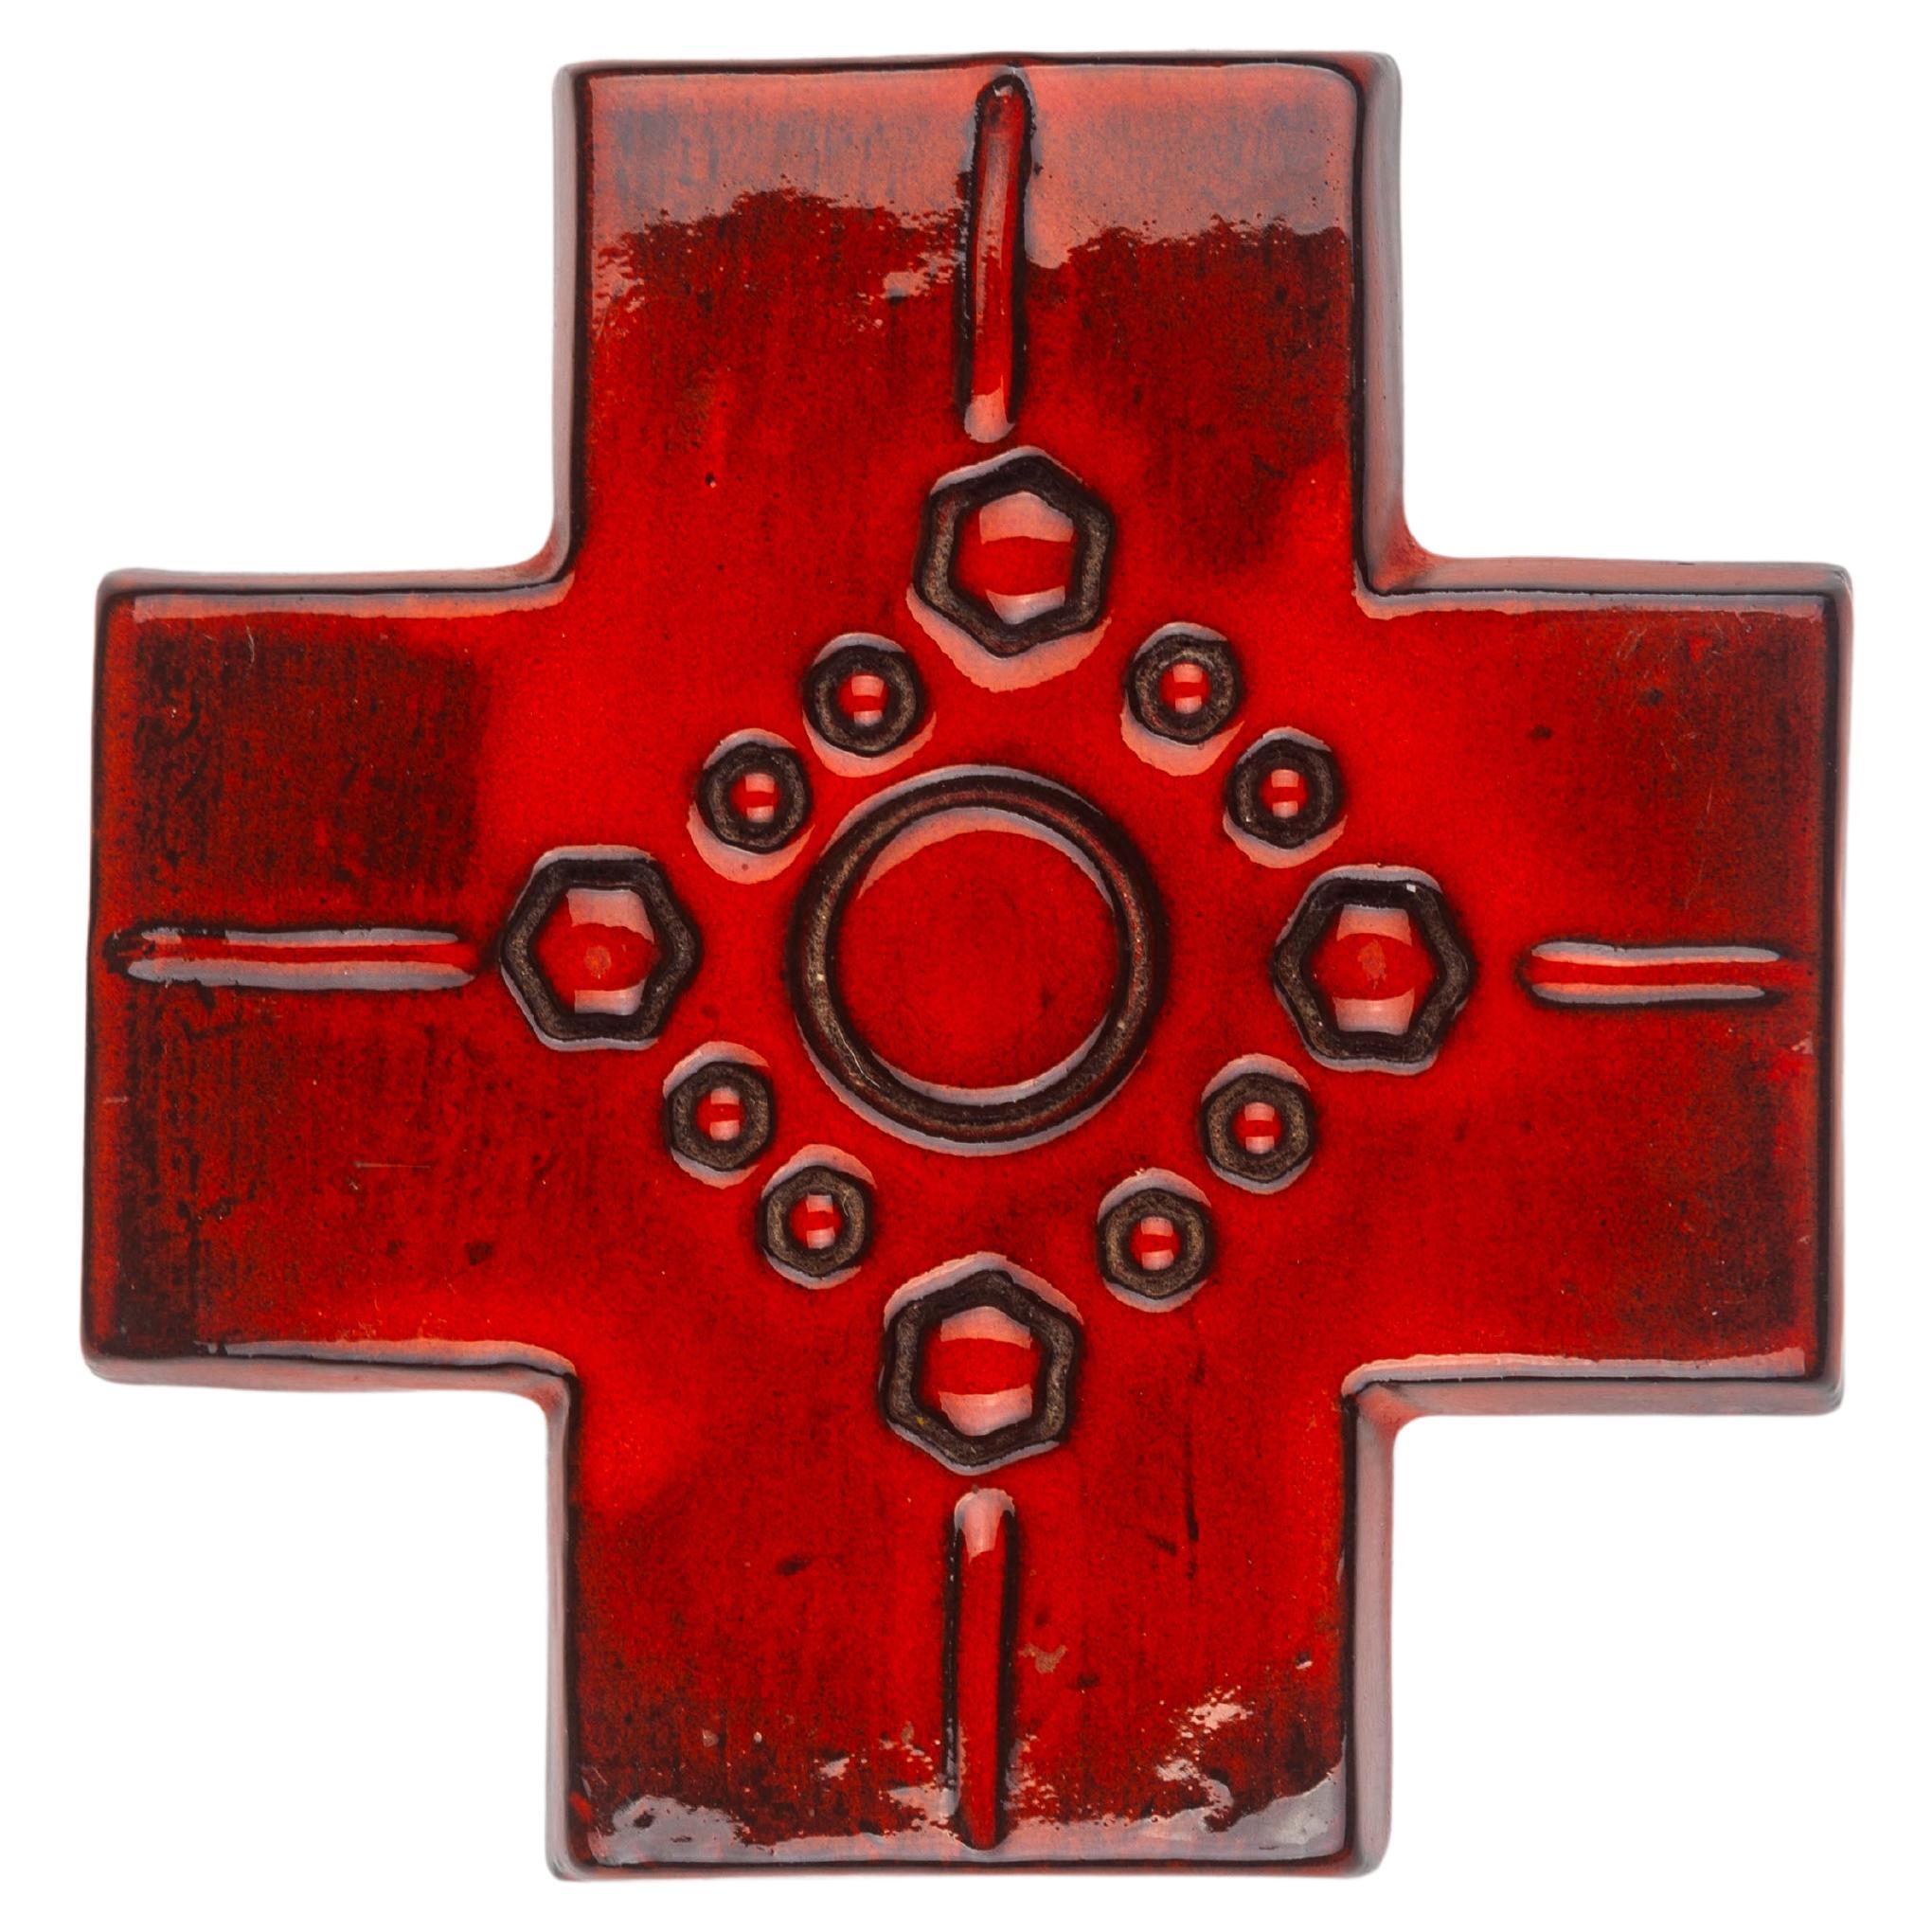 Red-Orange Glossy Ceramic Cross, Symmetrical Design with Circle Embellishments For Sale